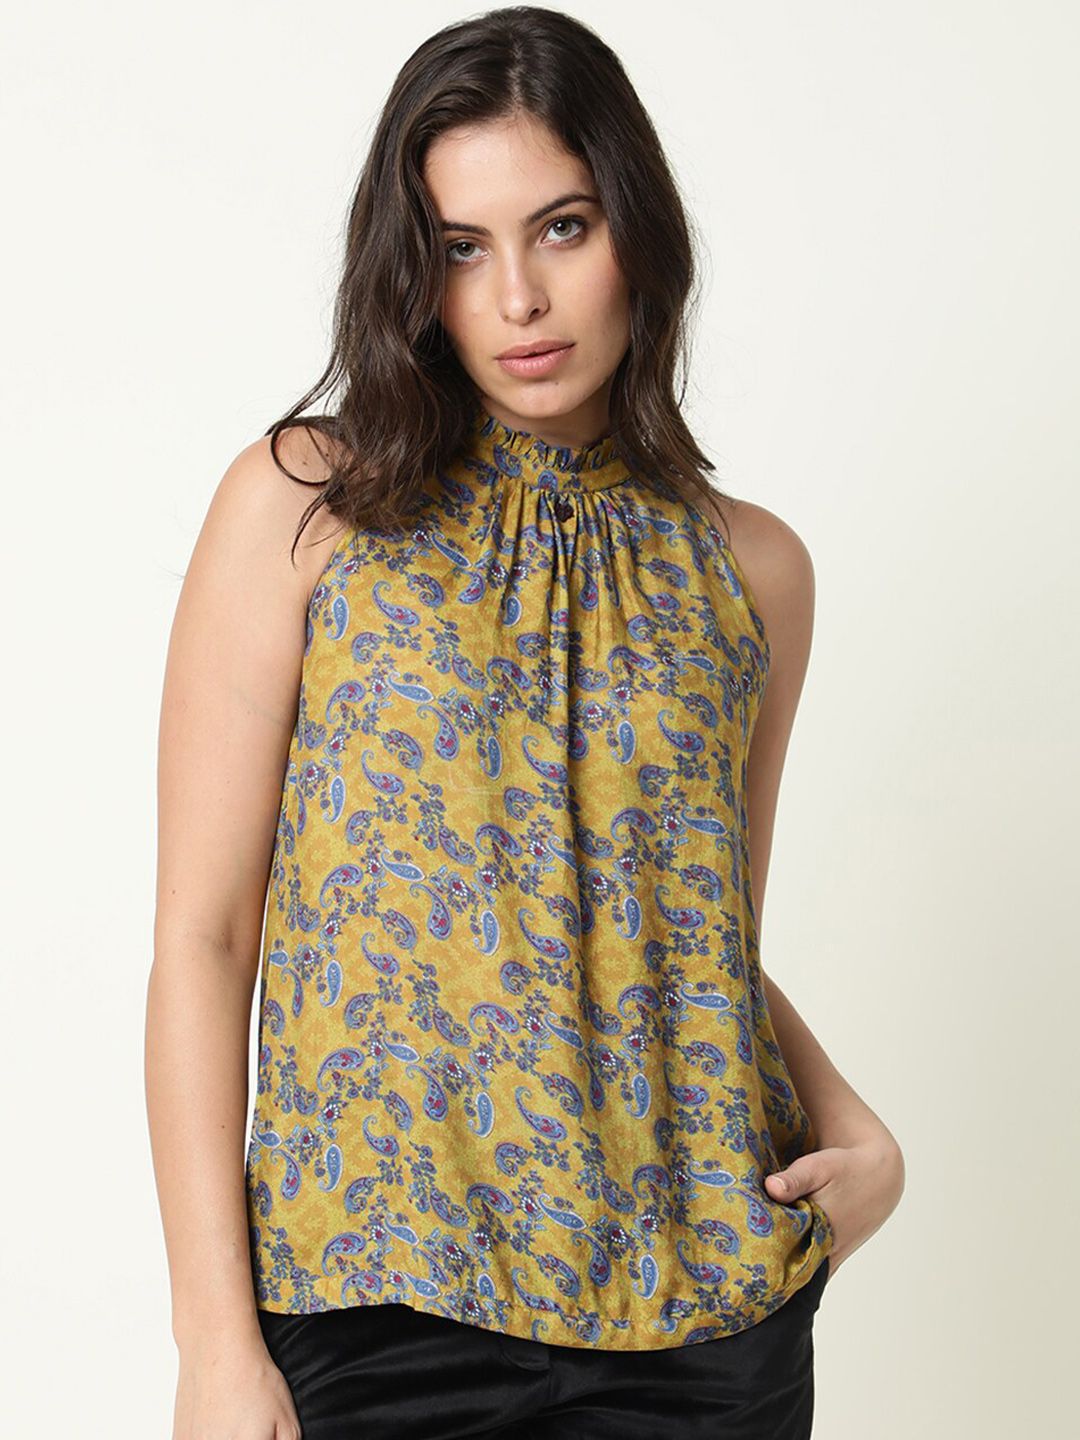 RAREISM Olive Green Floral Print Top Price in India